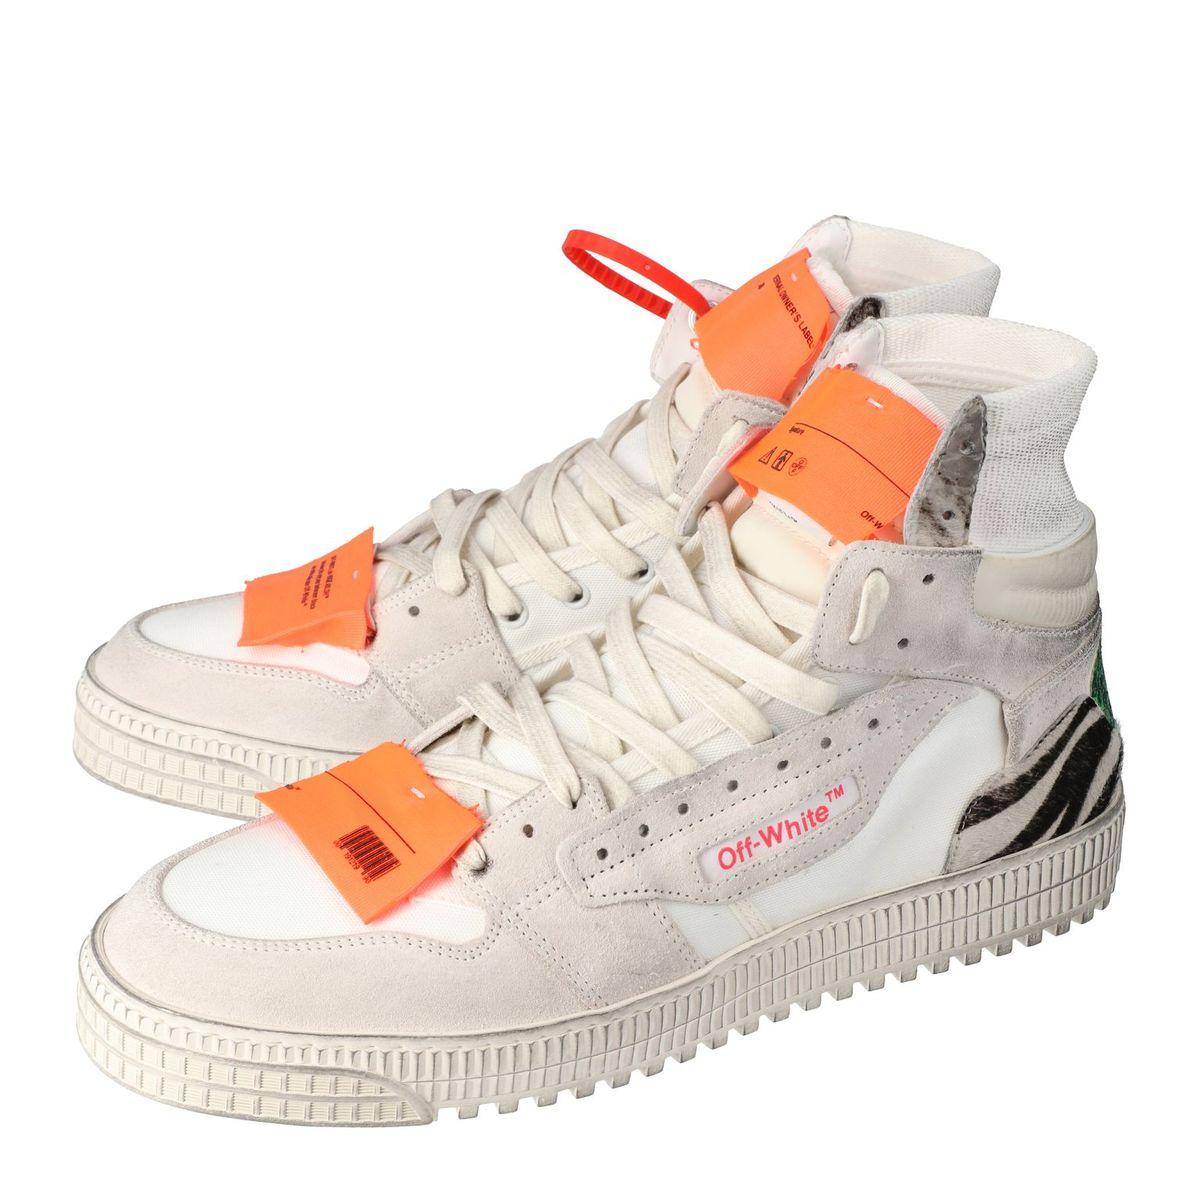 Off White Mix Media High Top Sneakers Size 40 1